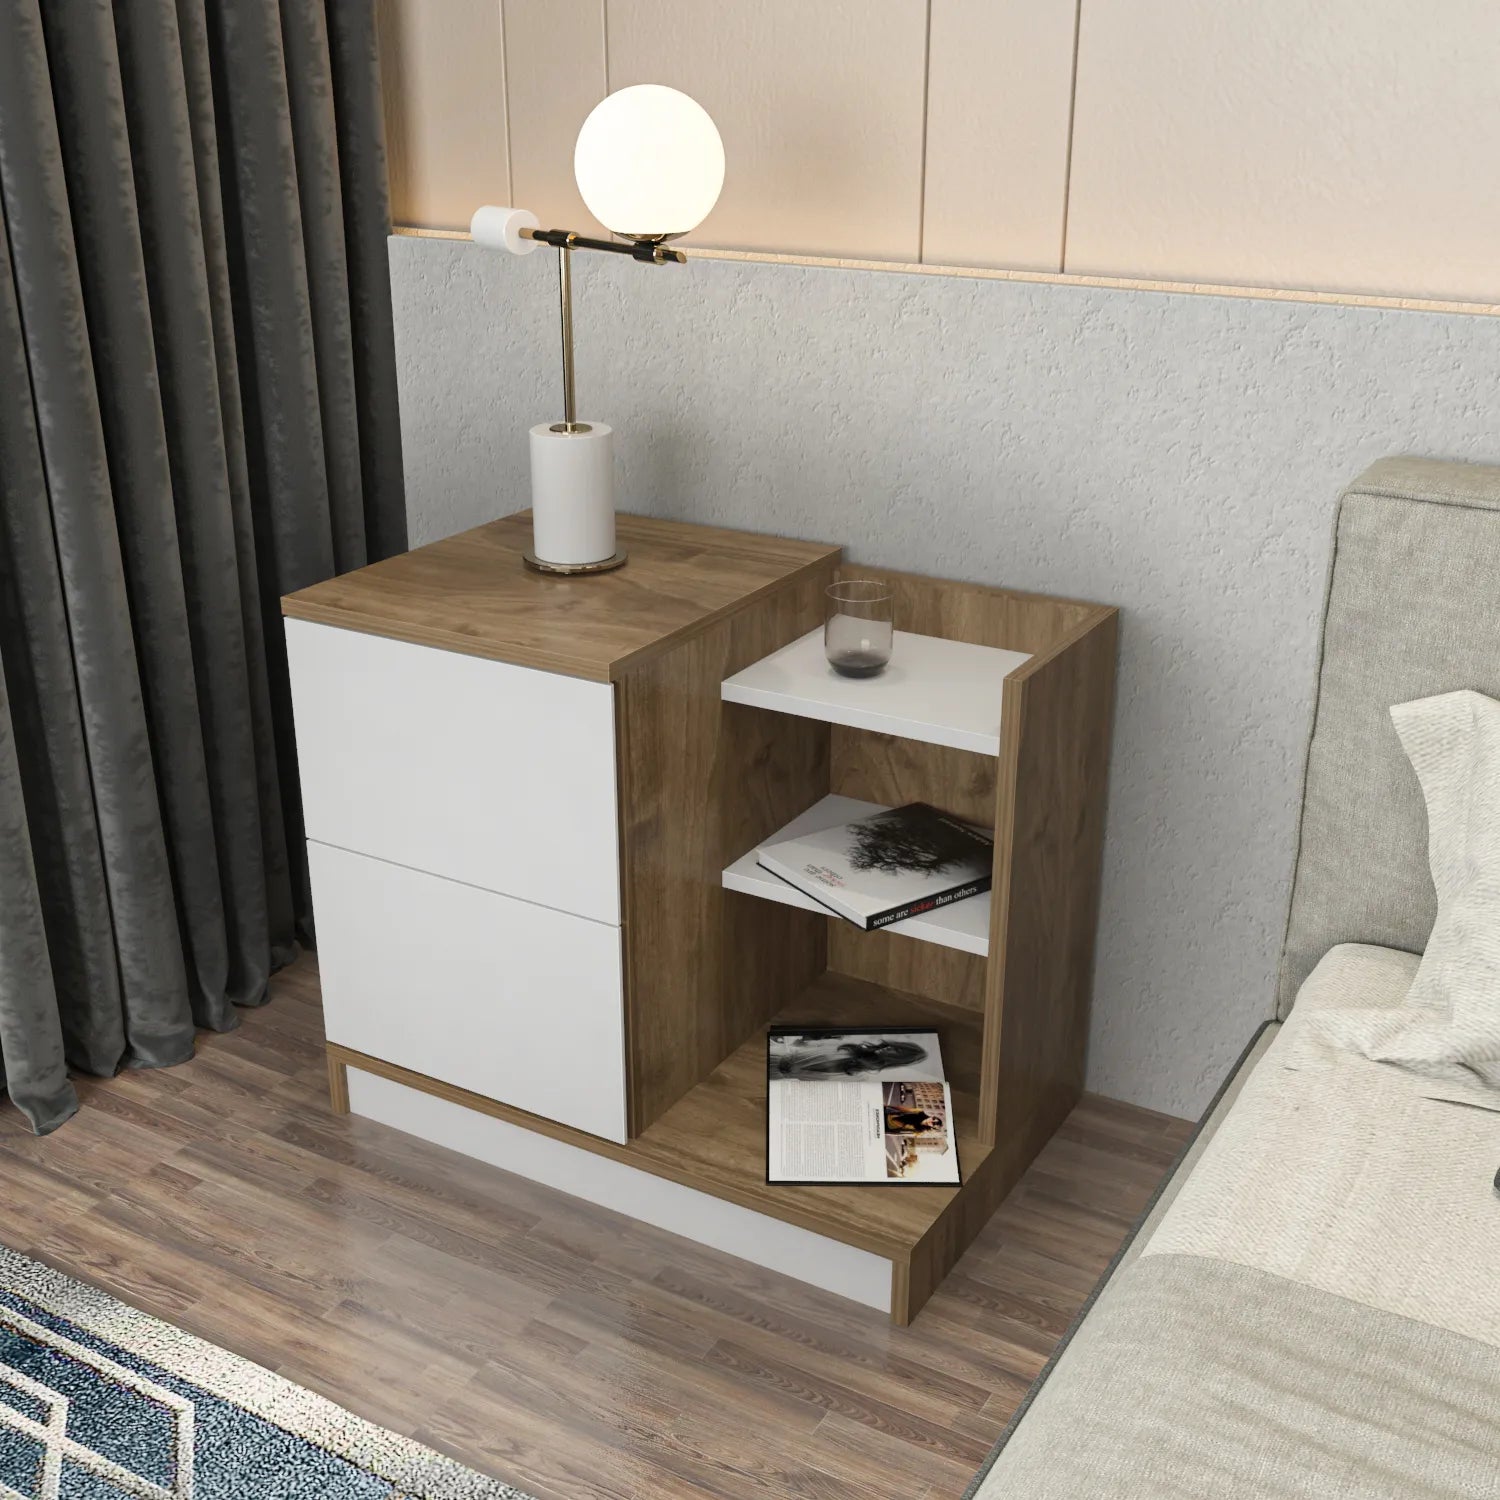 Rena Nightstand with Two Drawers and Open Shelves